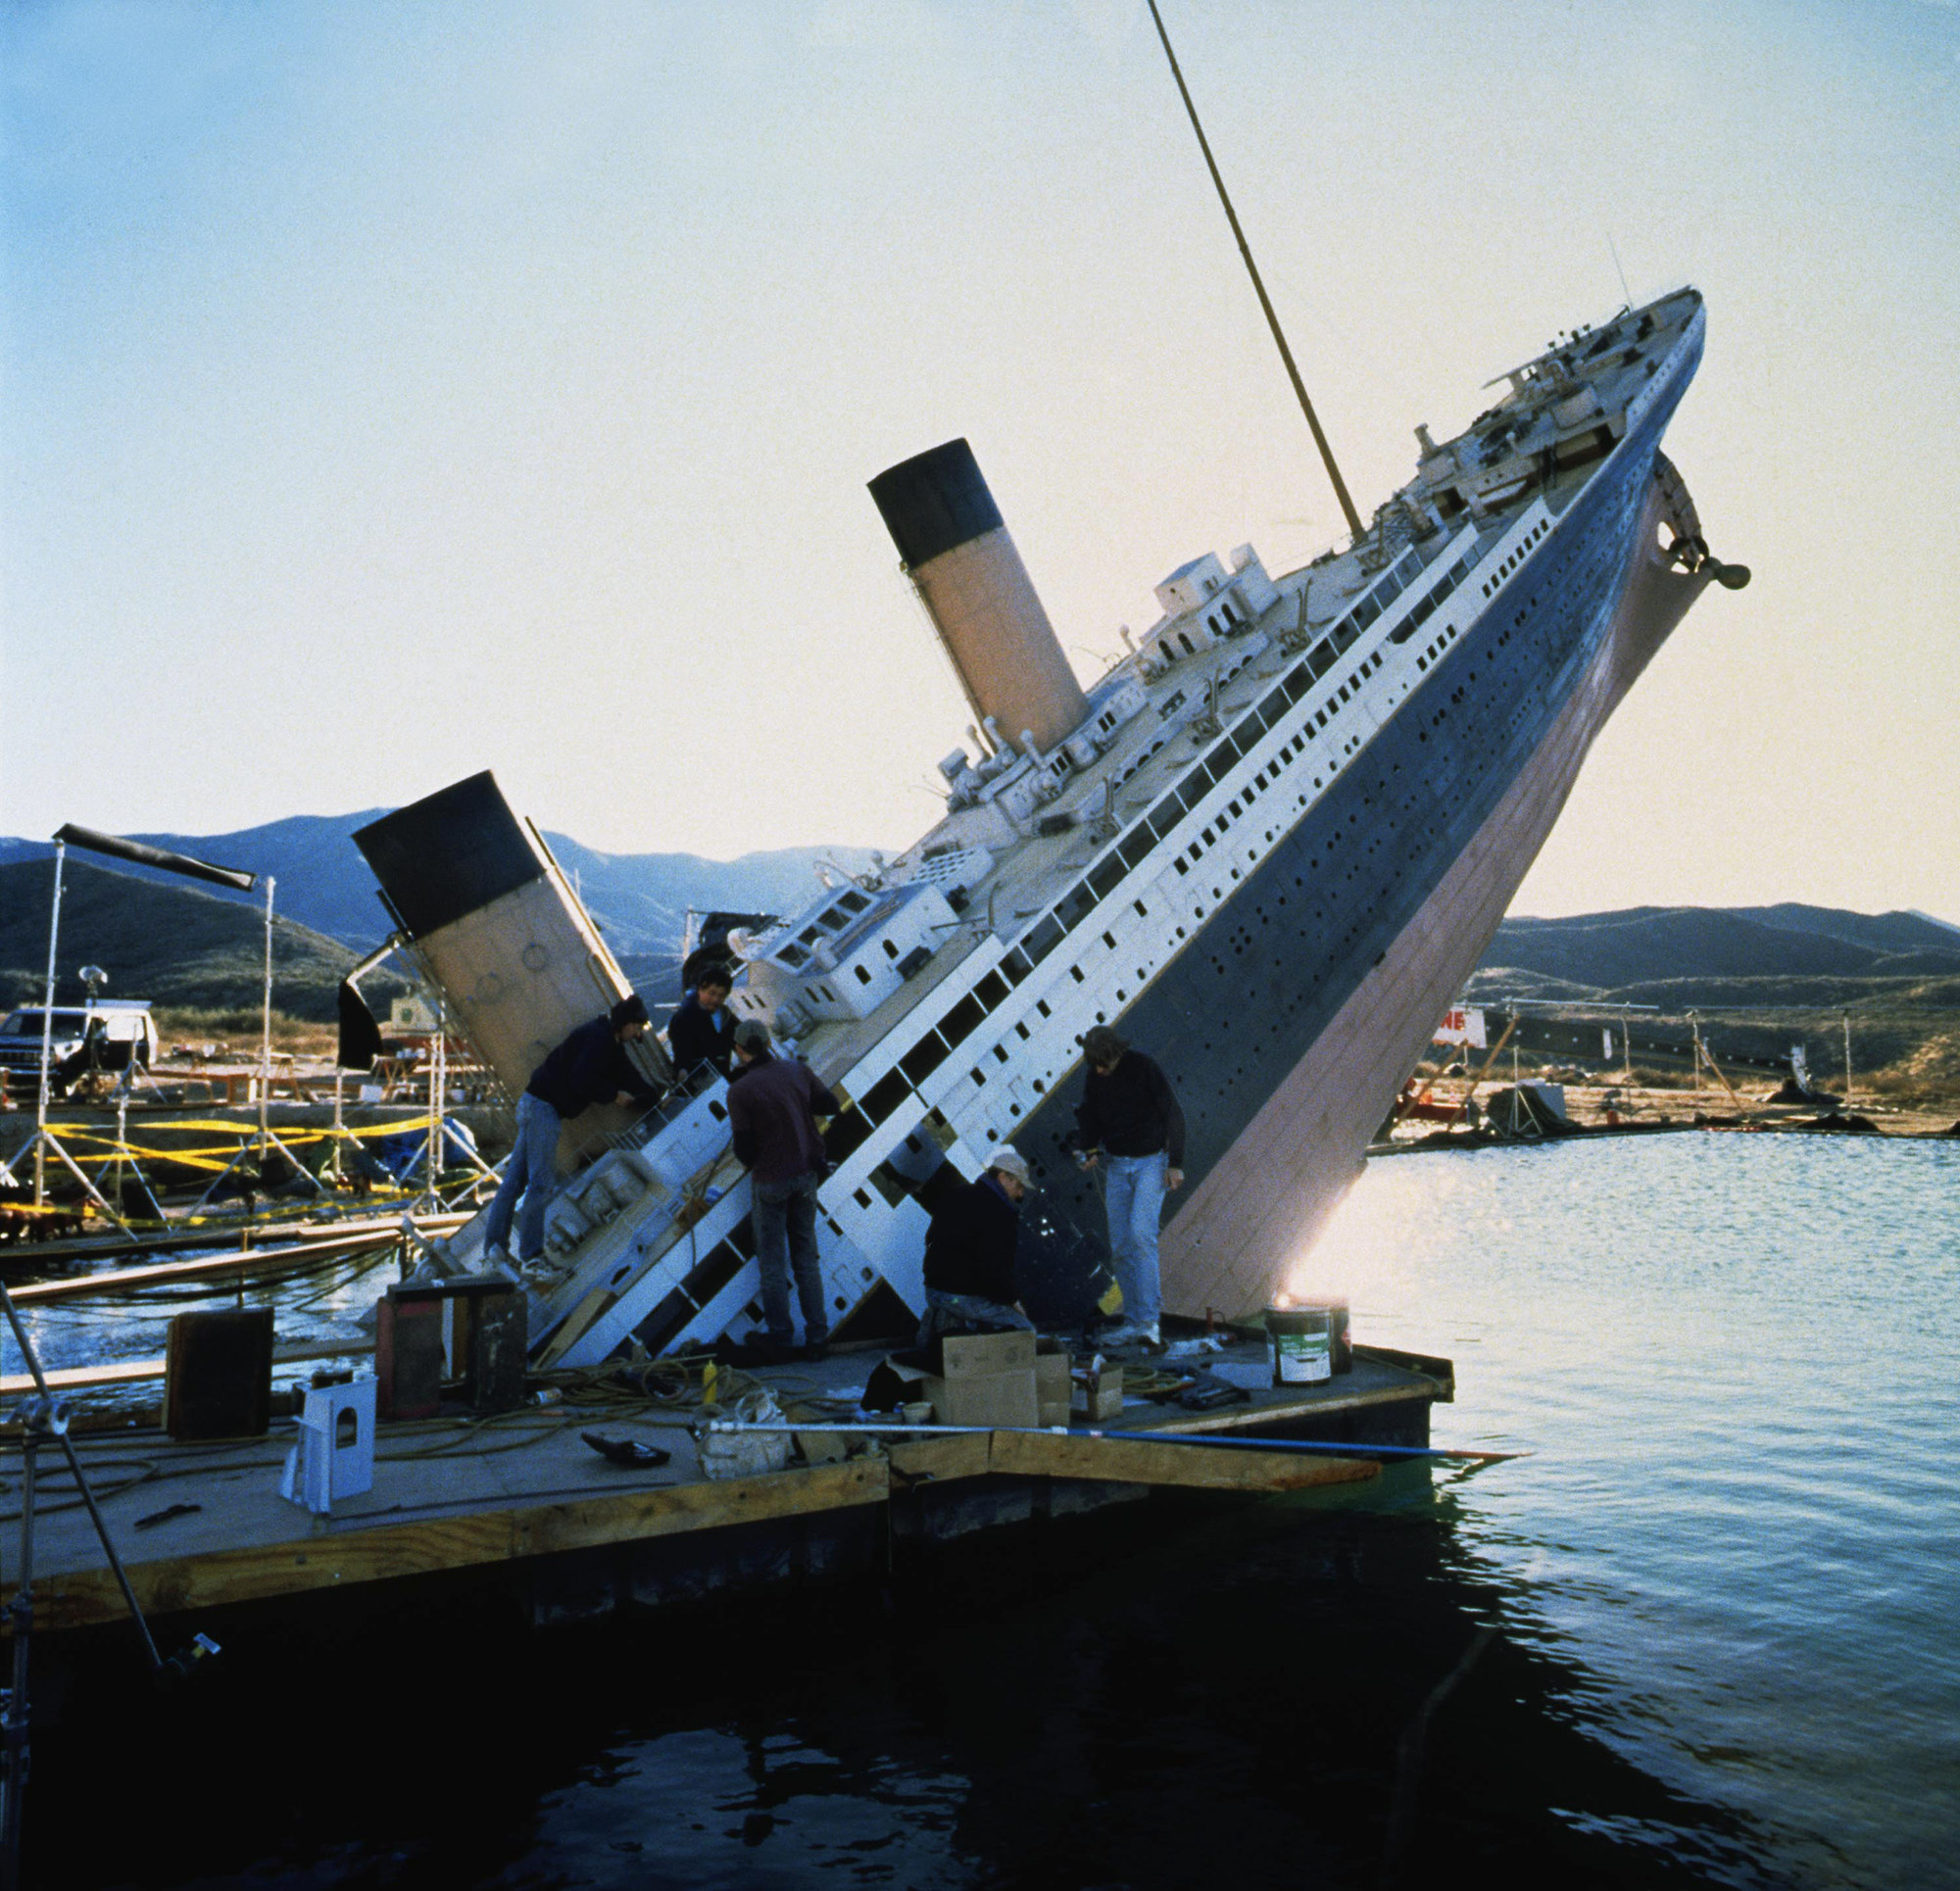 A model replica sinking Titanic ship on set that was used for the film